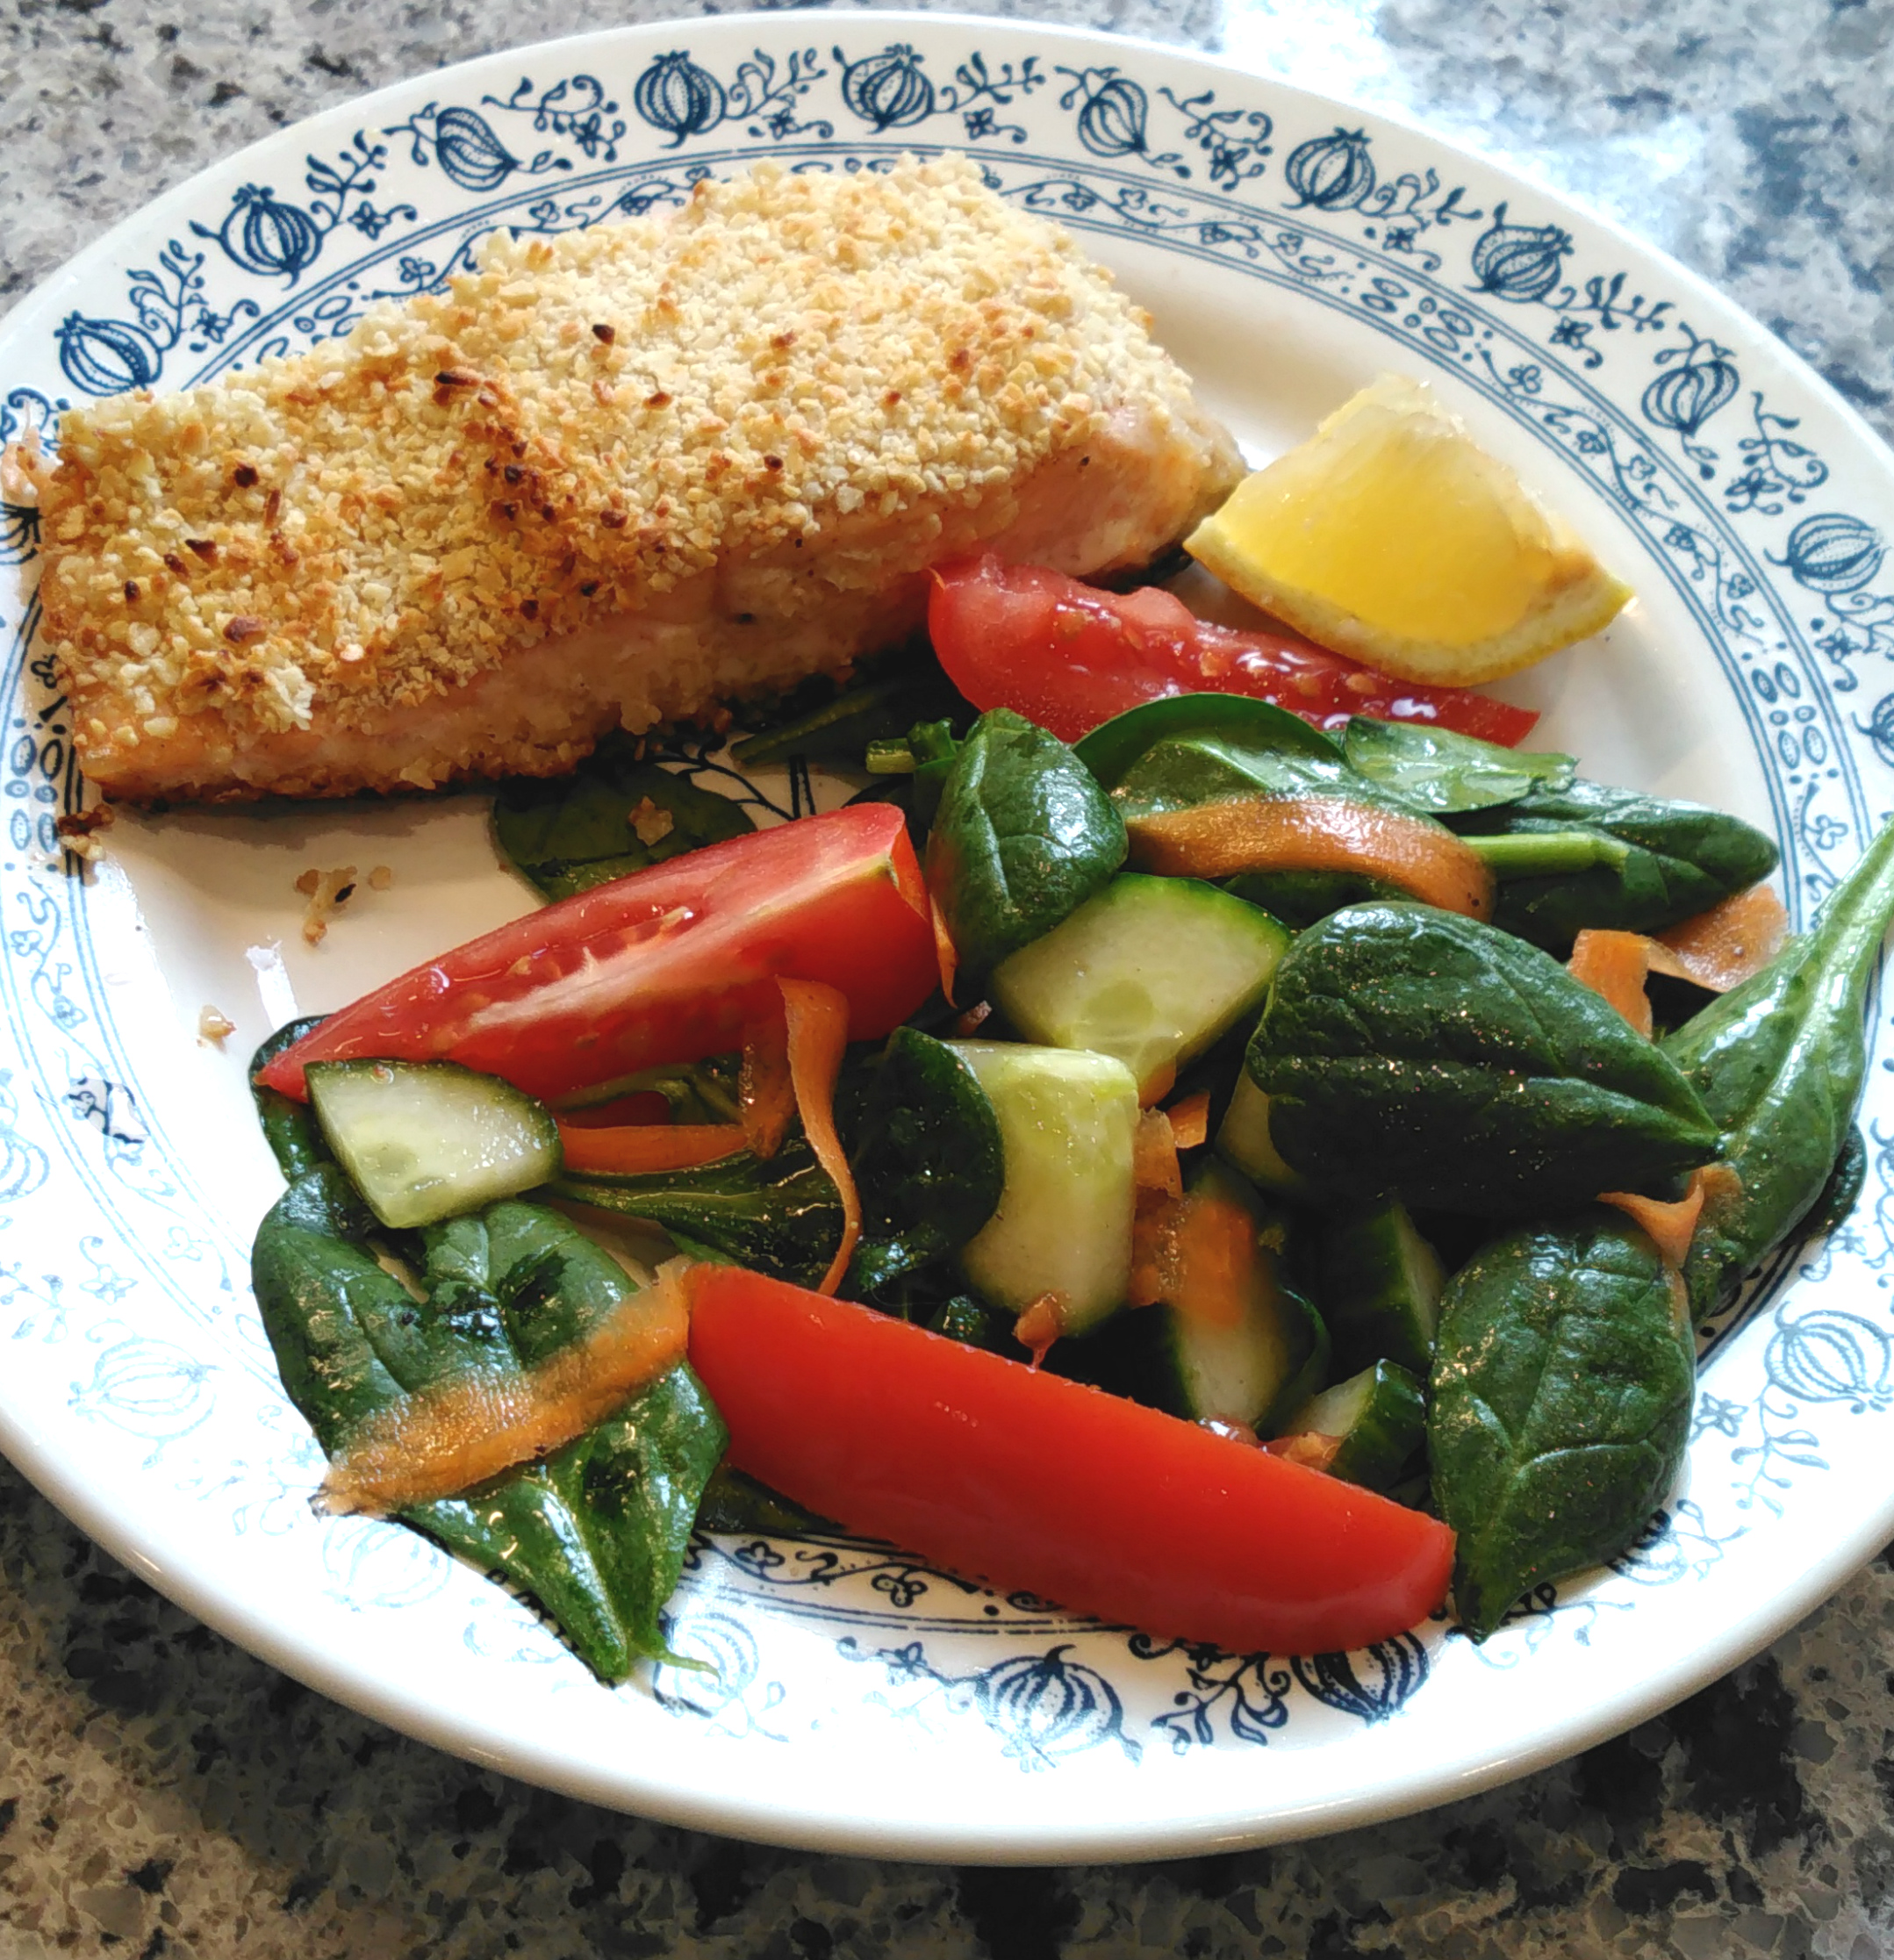 Almond-Crusted Salmon and Salad